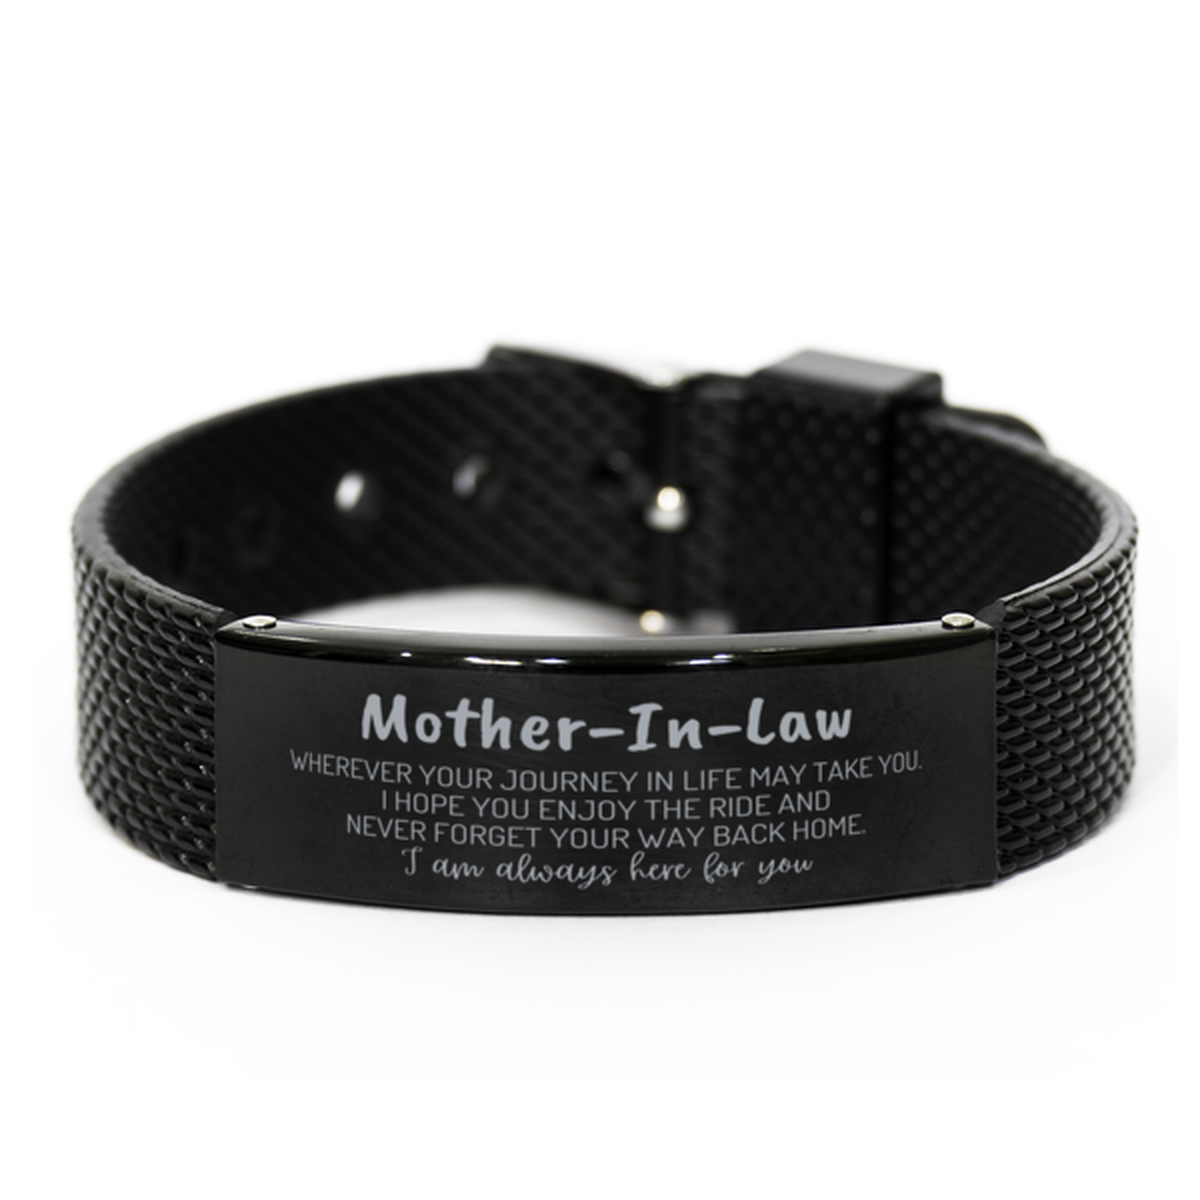 Mother-In-Law wherever your journey in life may take you, I am always here for you Mother-In-Law Black Shark Mesh Bracelet, Awesome Christmas Gifts For Mother-In-Law, Mother-In-Law Birthday Gifts for Men Women Family Loved One